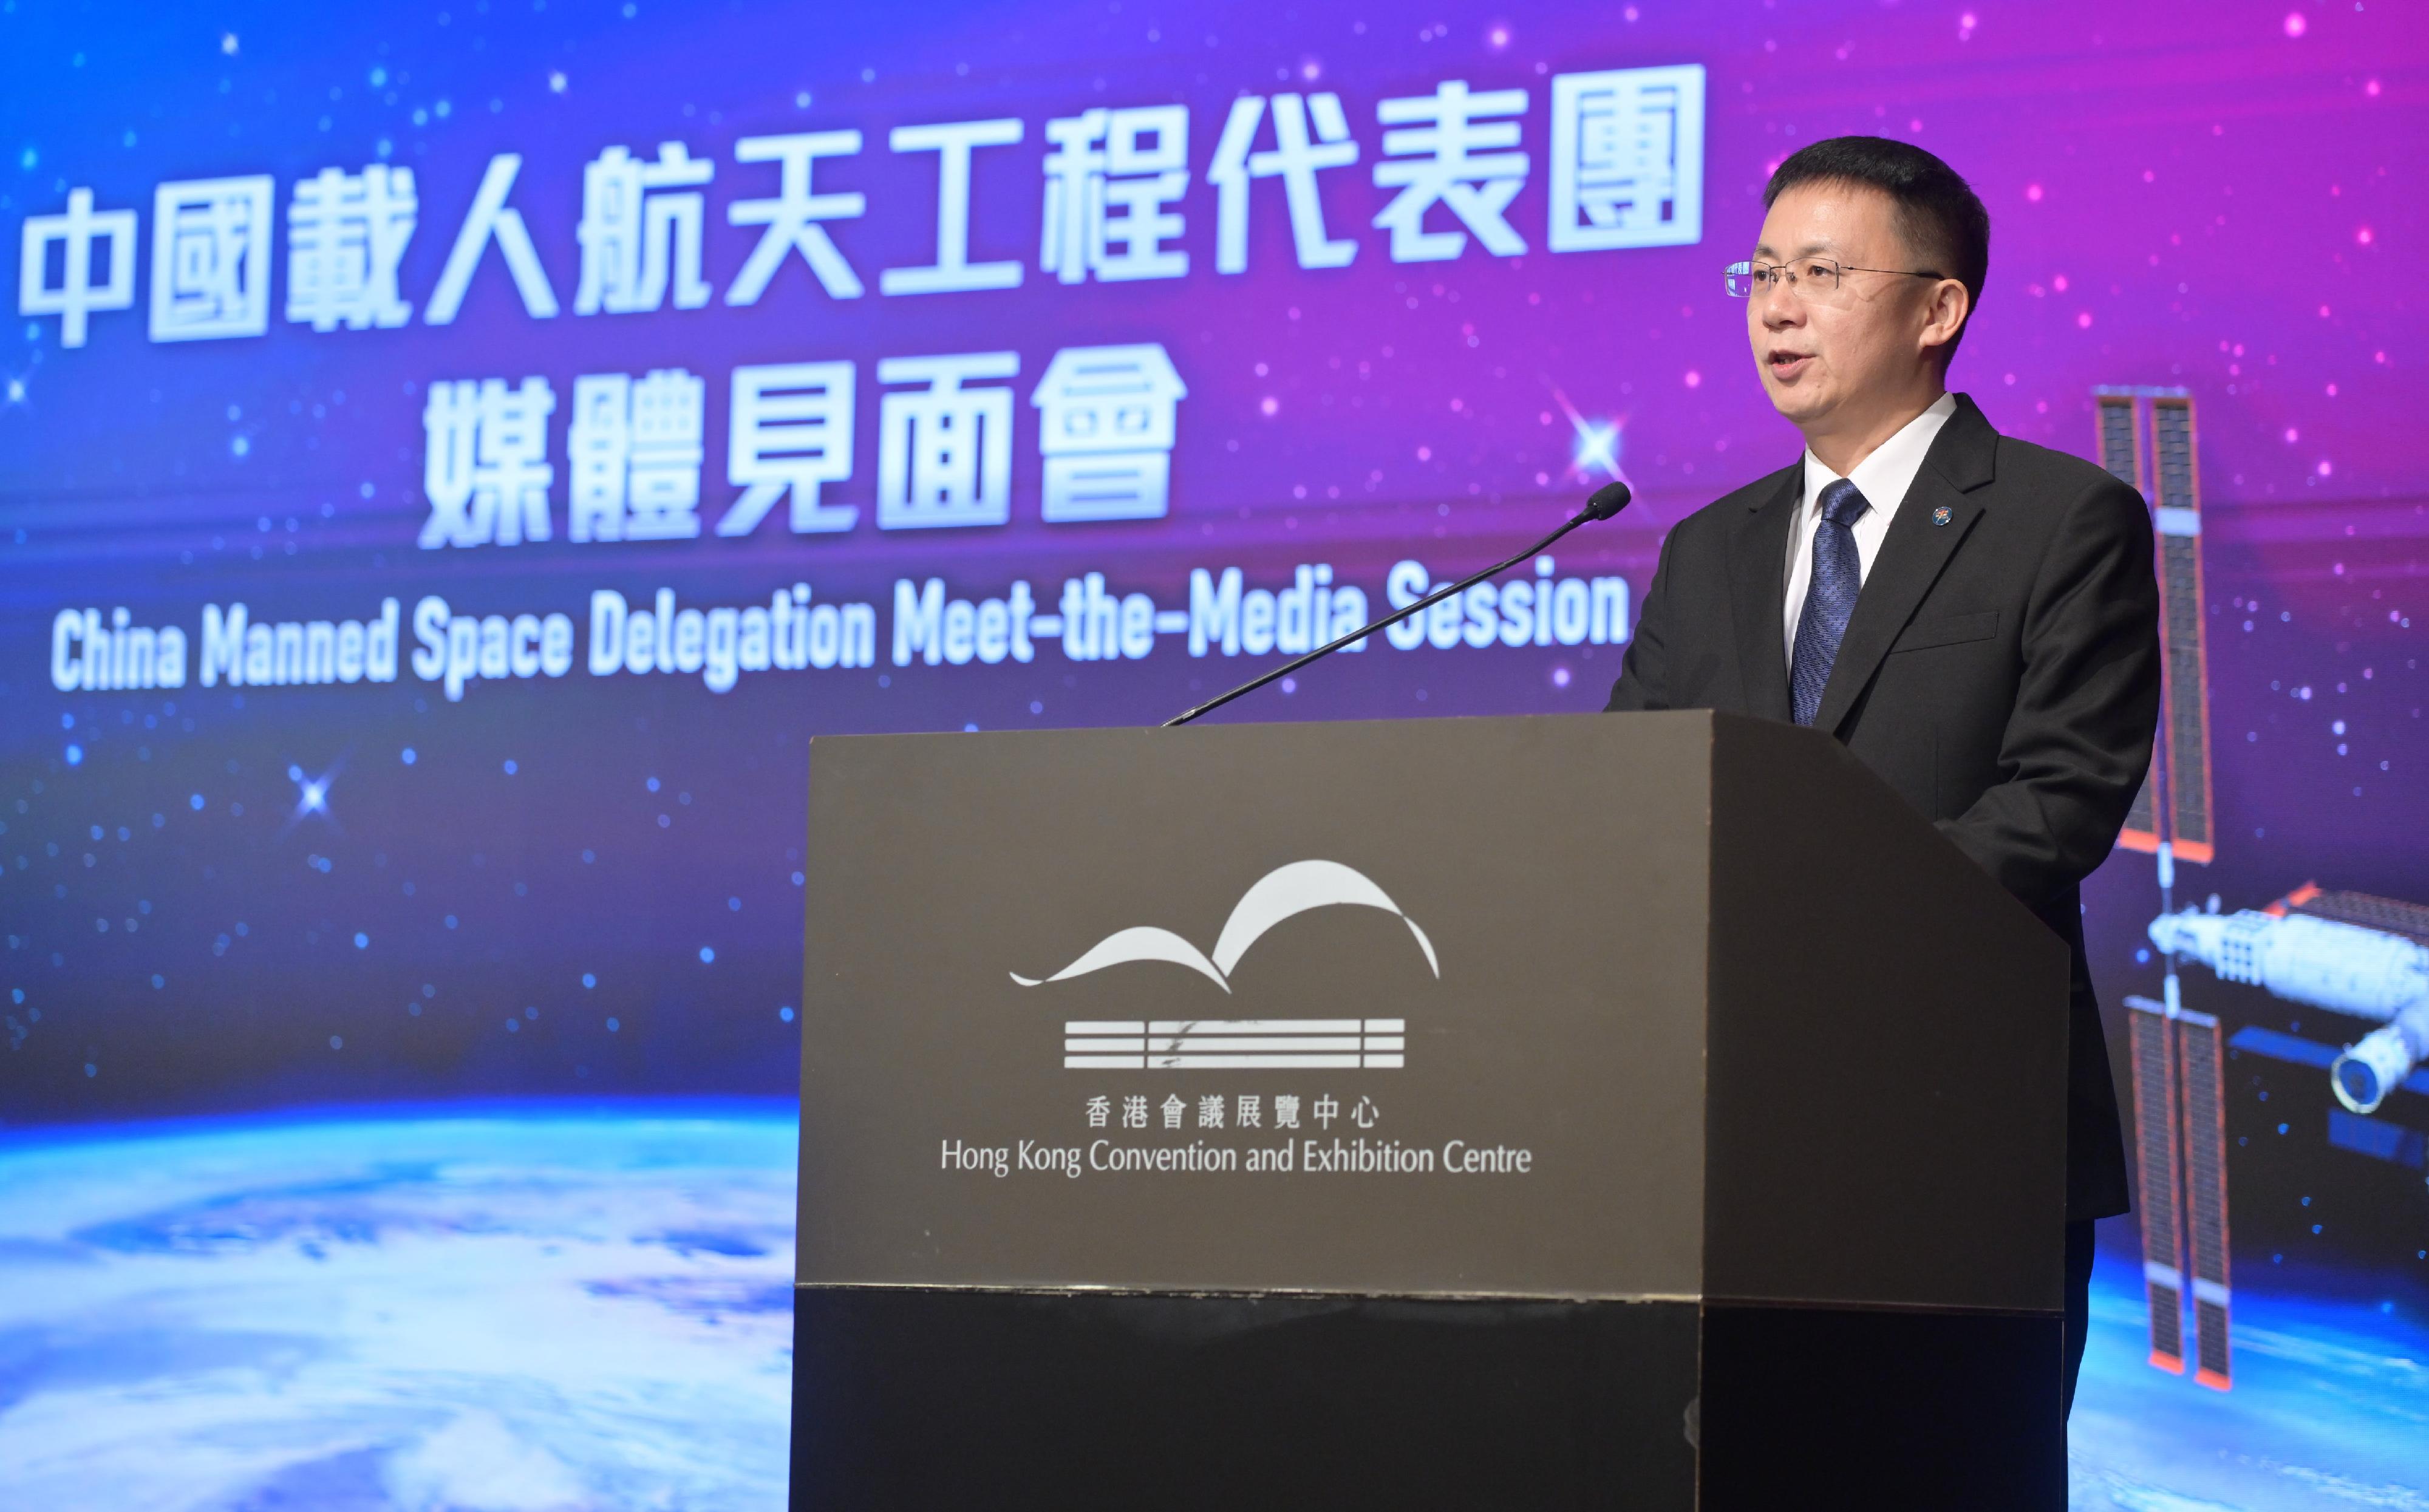 A China Manned Space delegation arrived in Hong Kong today (November 28) for a four-day visit. Photo shows the leader of the delegation and the Deputy Director General of the China Manned Space Agency, Mr Lin Xiqiang, speaking at the meet-the-media session.